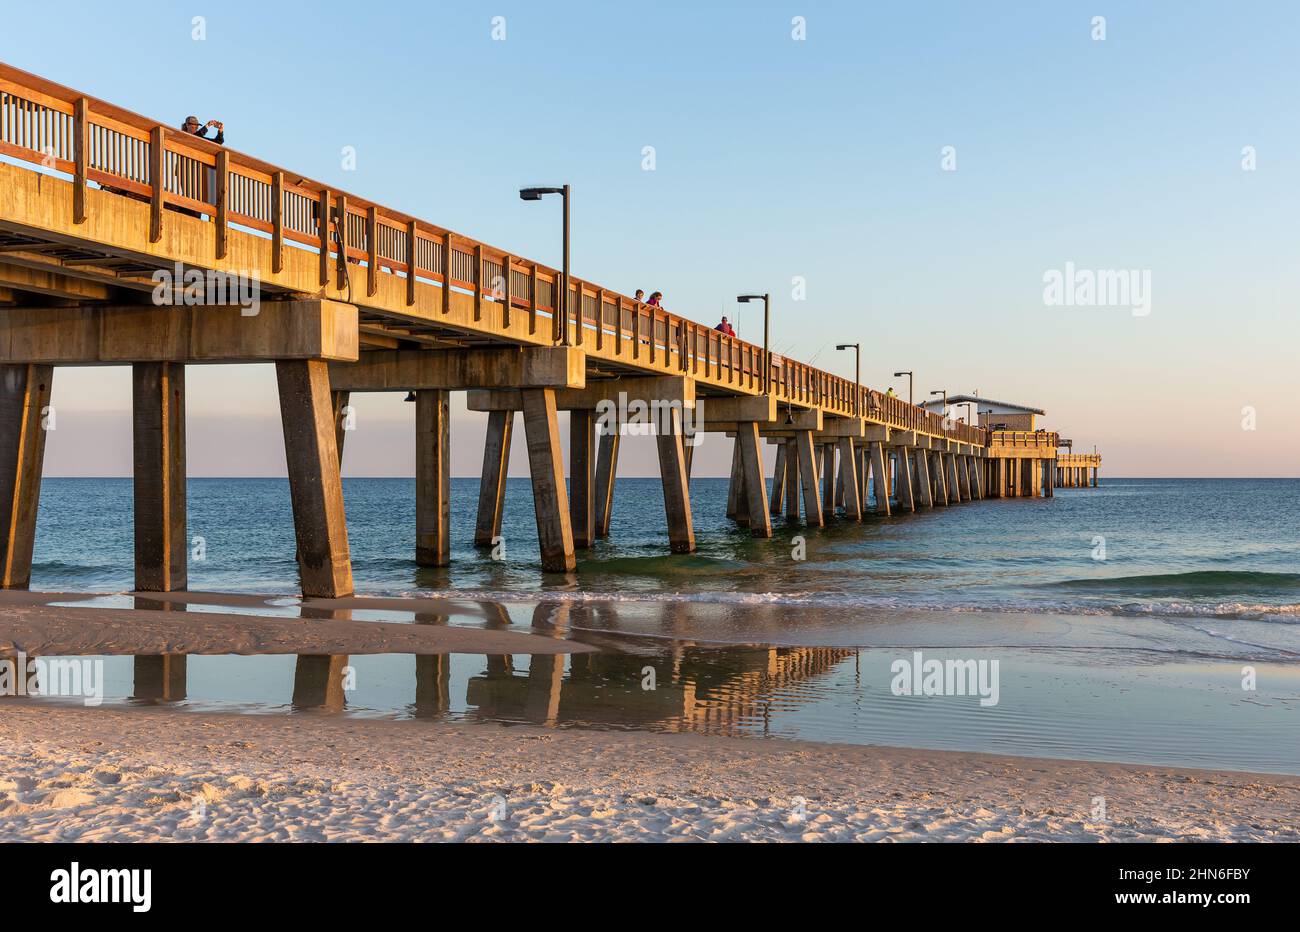 Gulf Shores, AL - March 6, 2021: The Gulf State Park Pier is a popular destination due to its scenic views and fishing opportunities.  The pier was da Stock Photo